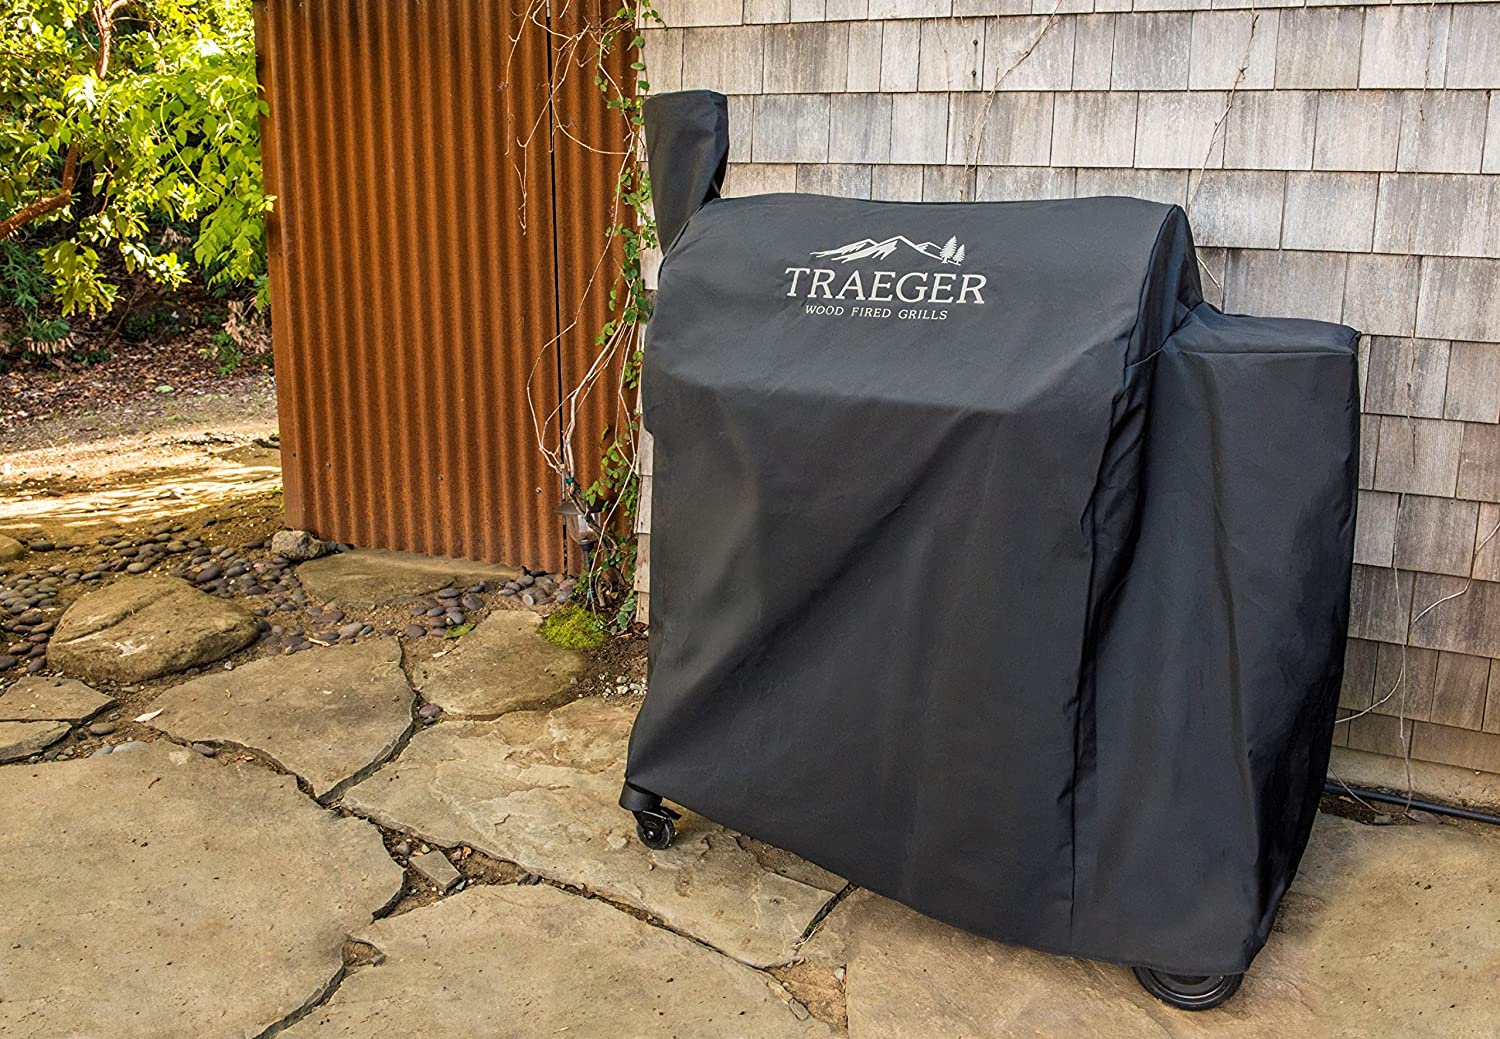 Traeger Pro 780 Grill Cover Full Length Lifestyle Covering the Grill Placed Outside